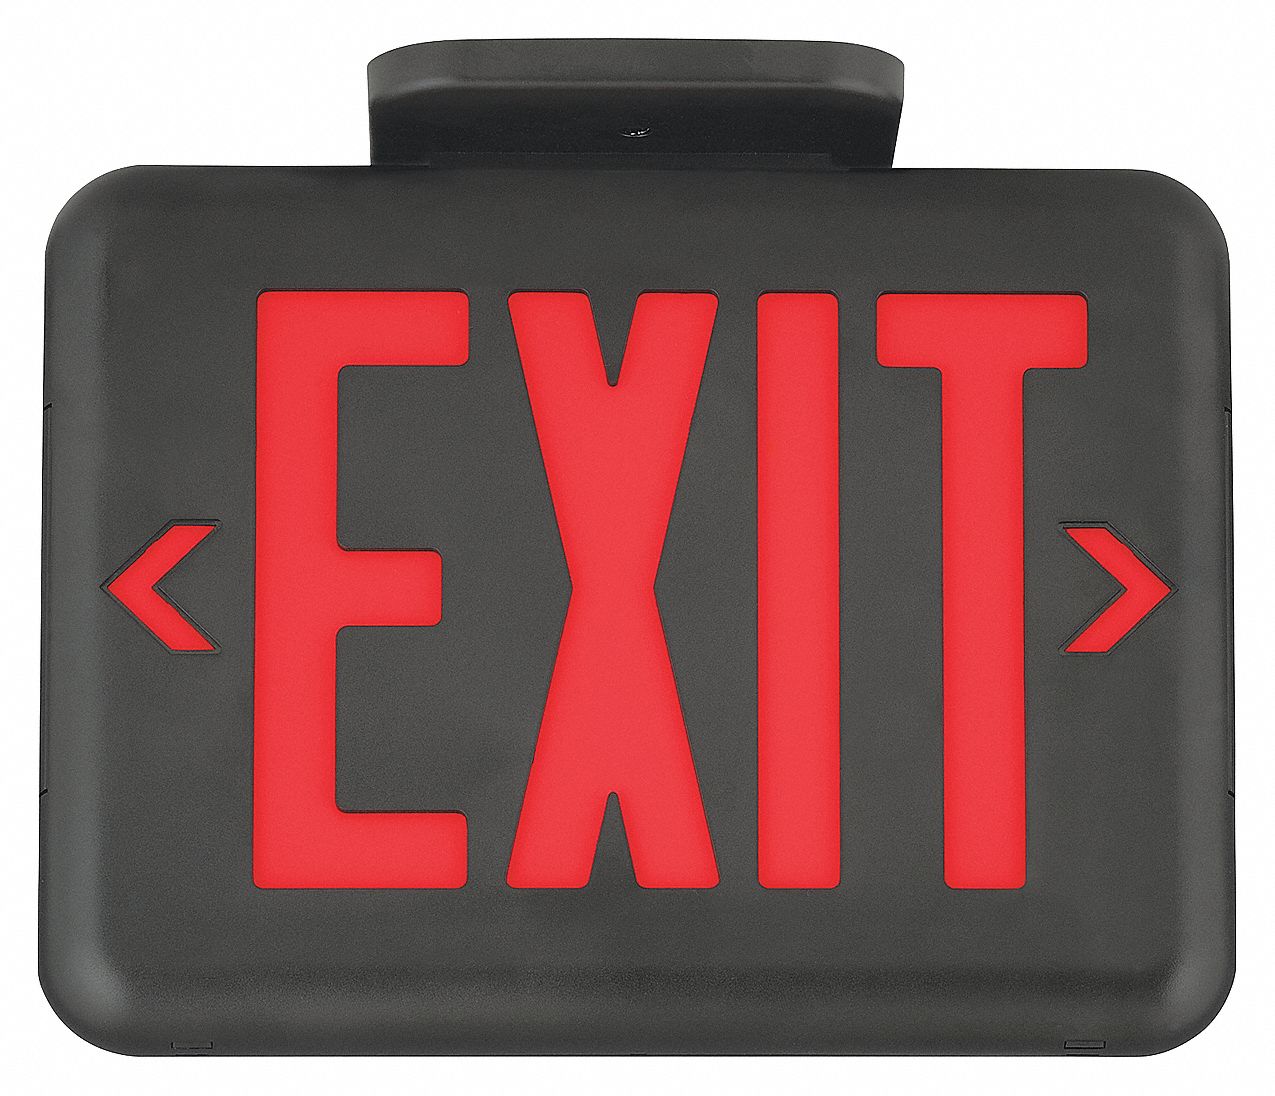 Details about    Hubbell Dual-lite Q403013PCICC LXURWEI-WMV11 Exit Sign  Single Side